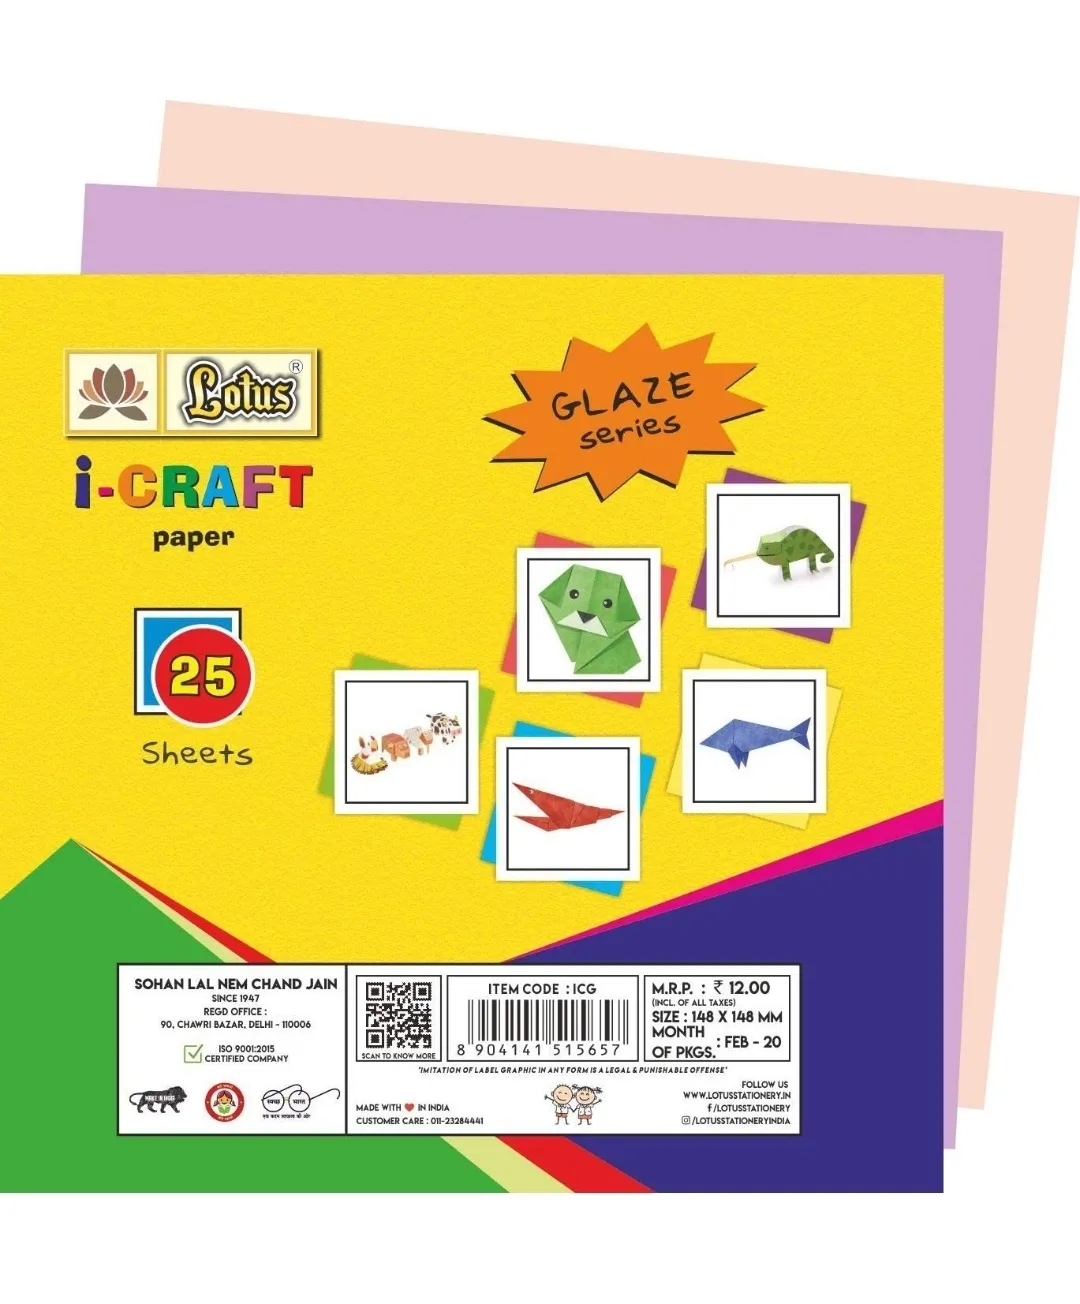 Lotus I - Craft Paper, Glaze Series, Square Paper, Multi Color, 14.8 X 14.8 cm, 25 Packs (1 Pack of 25 Sheets)